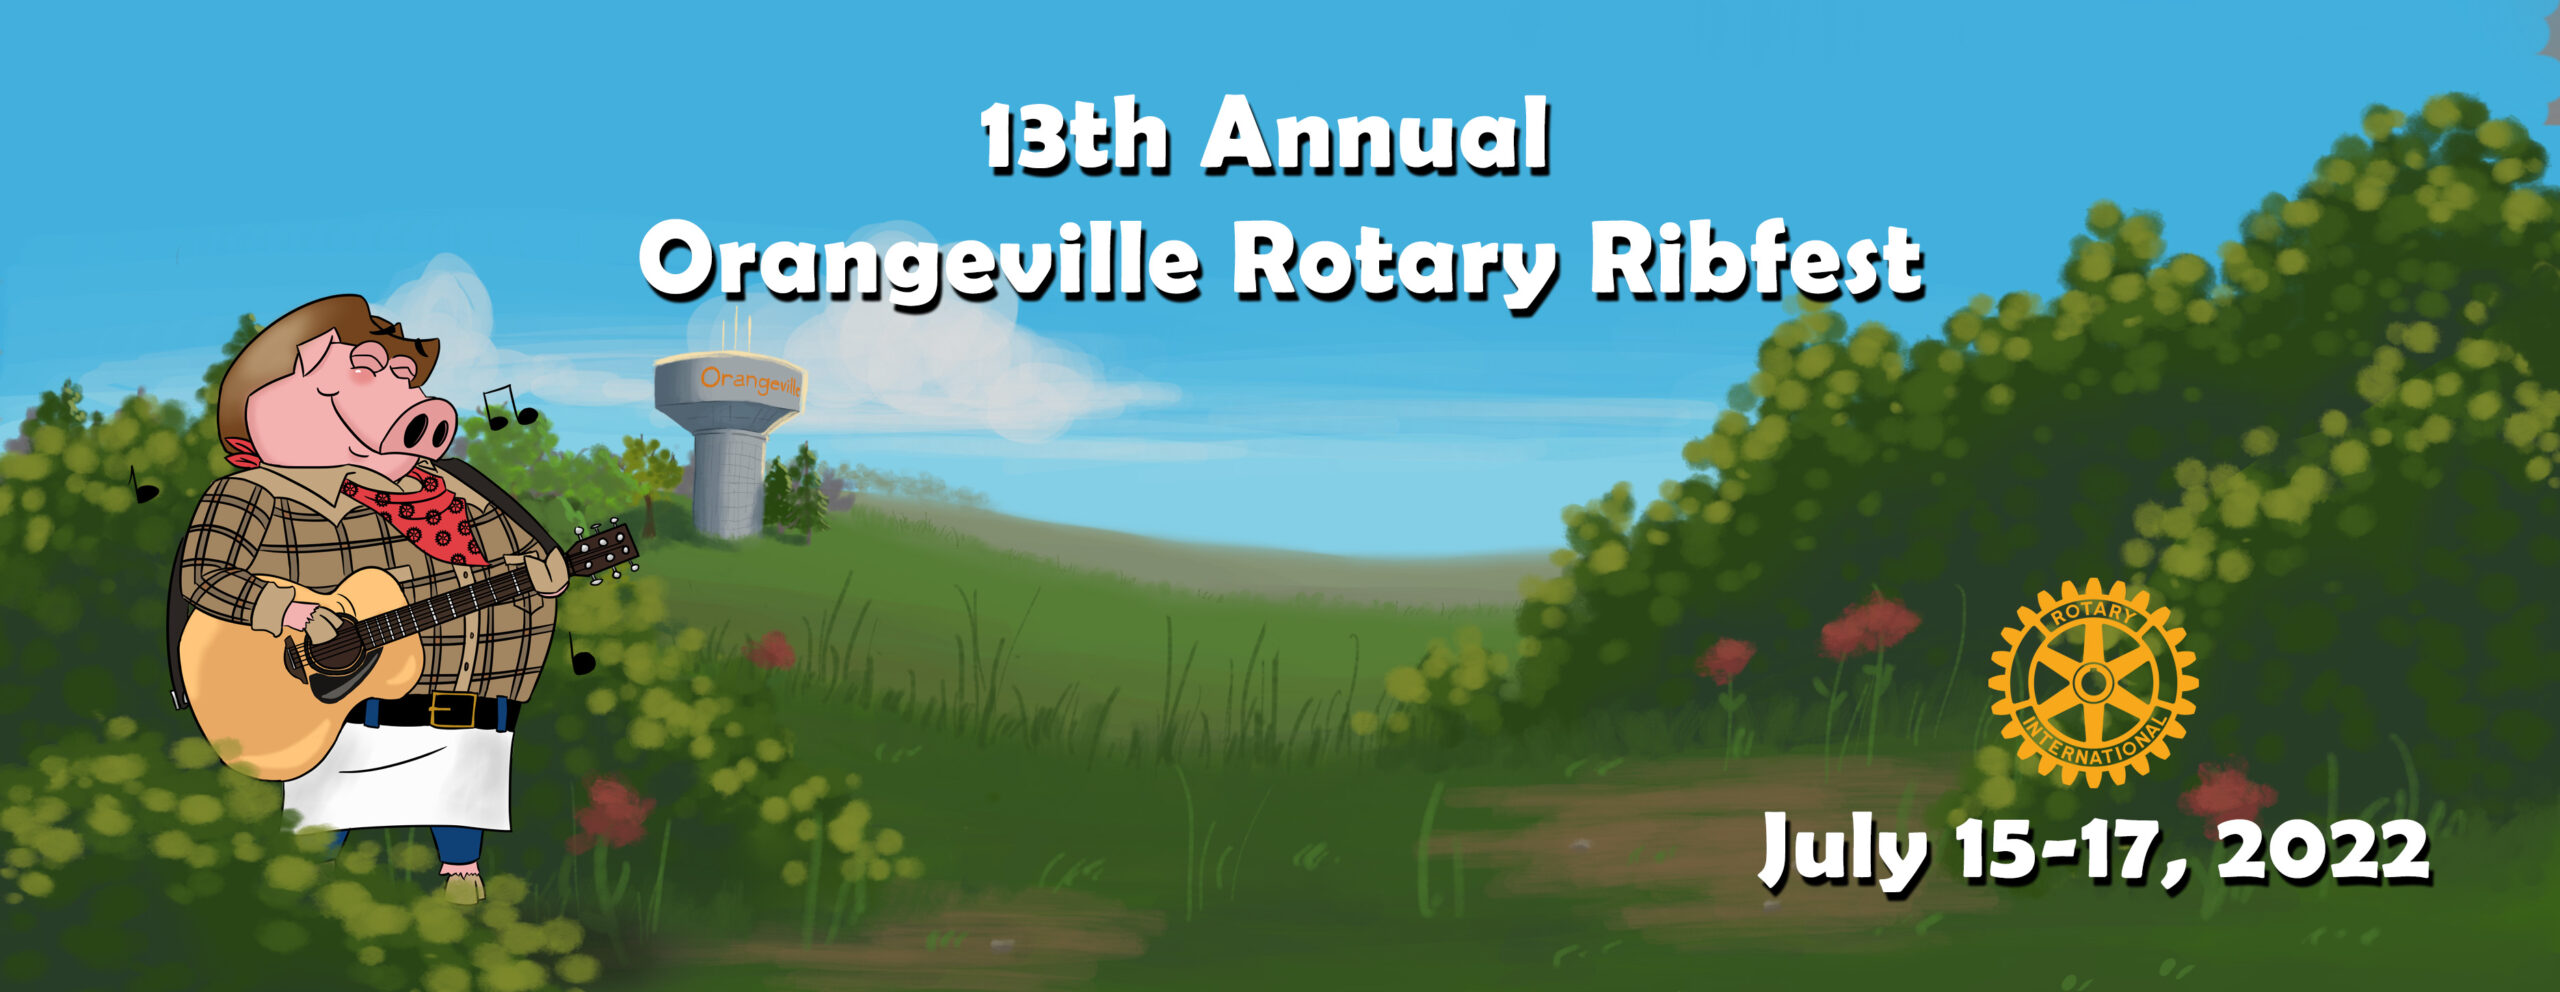 Cartoon image of a field with the Orangeville water tower in background, and the mascot announcing 13th Annual Orangeville Rotary Ribfest on July 15 to 17, 2022.